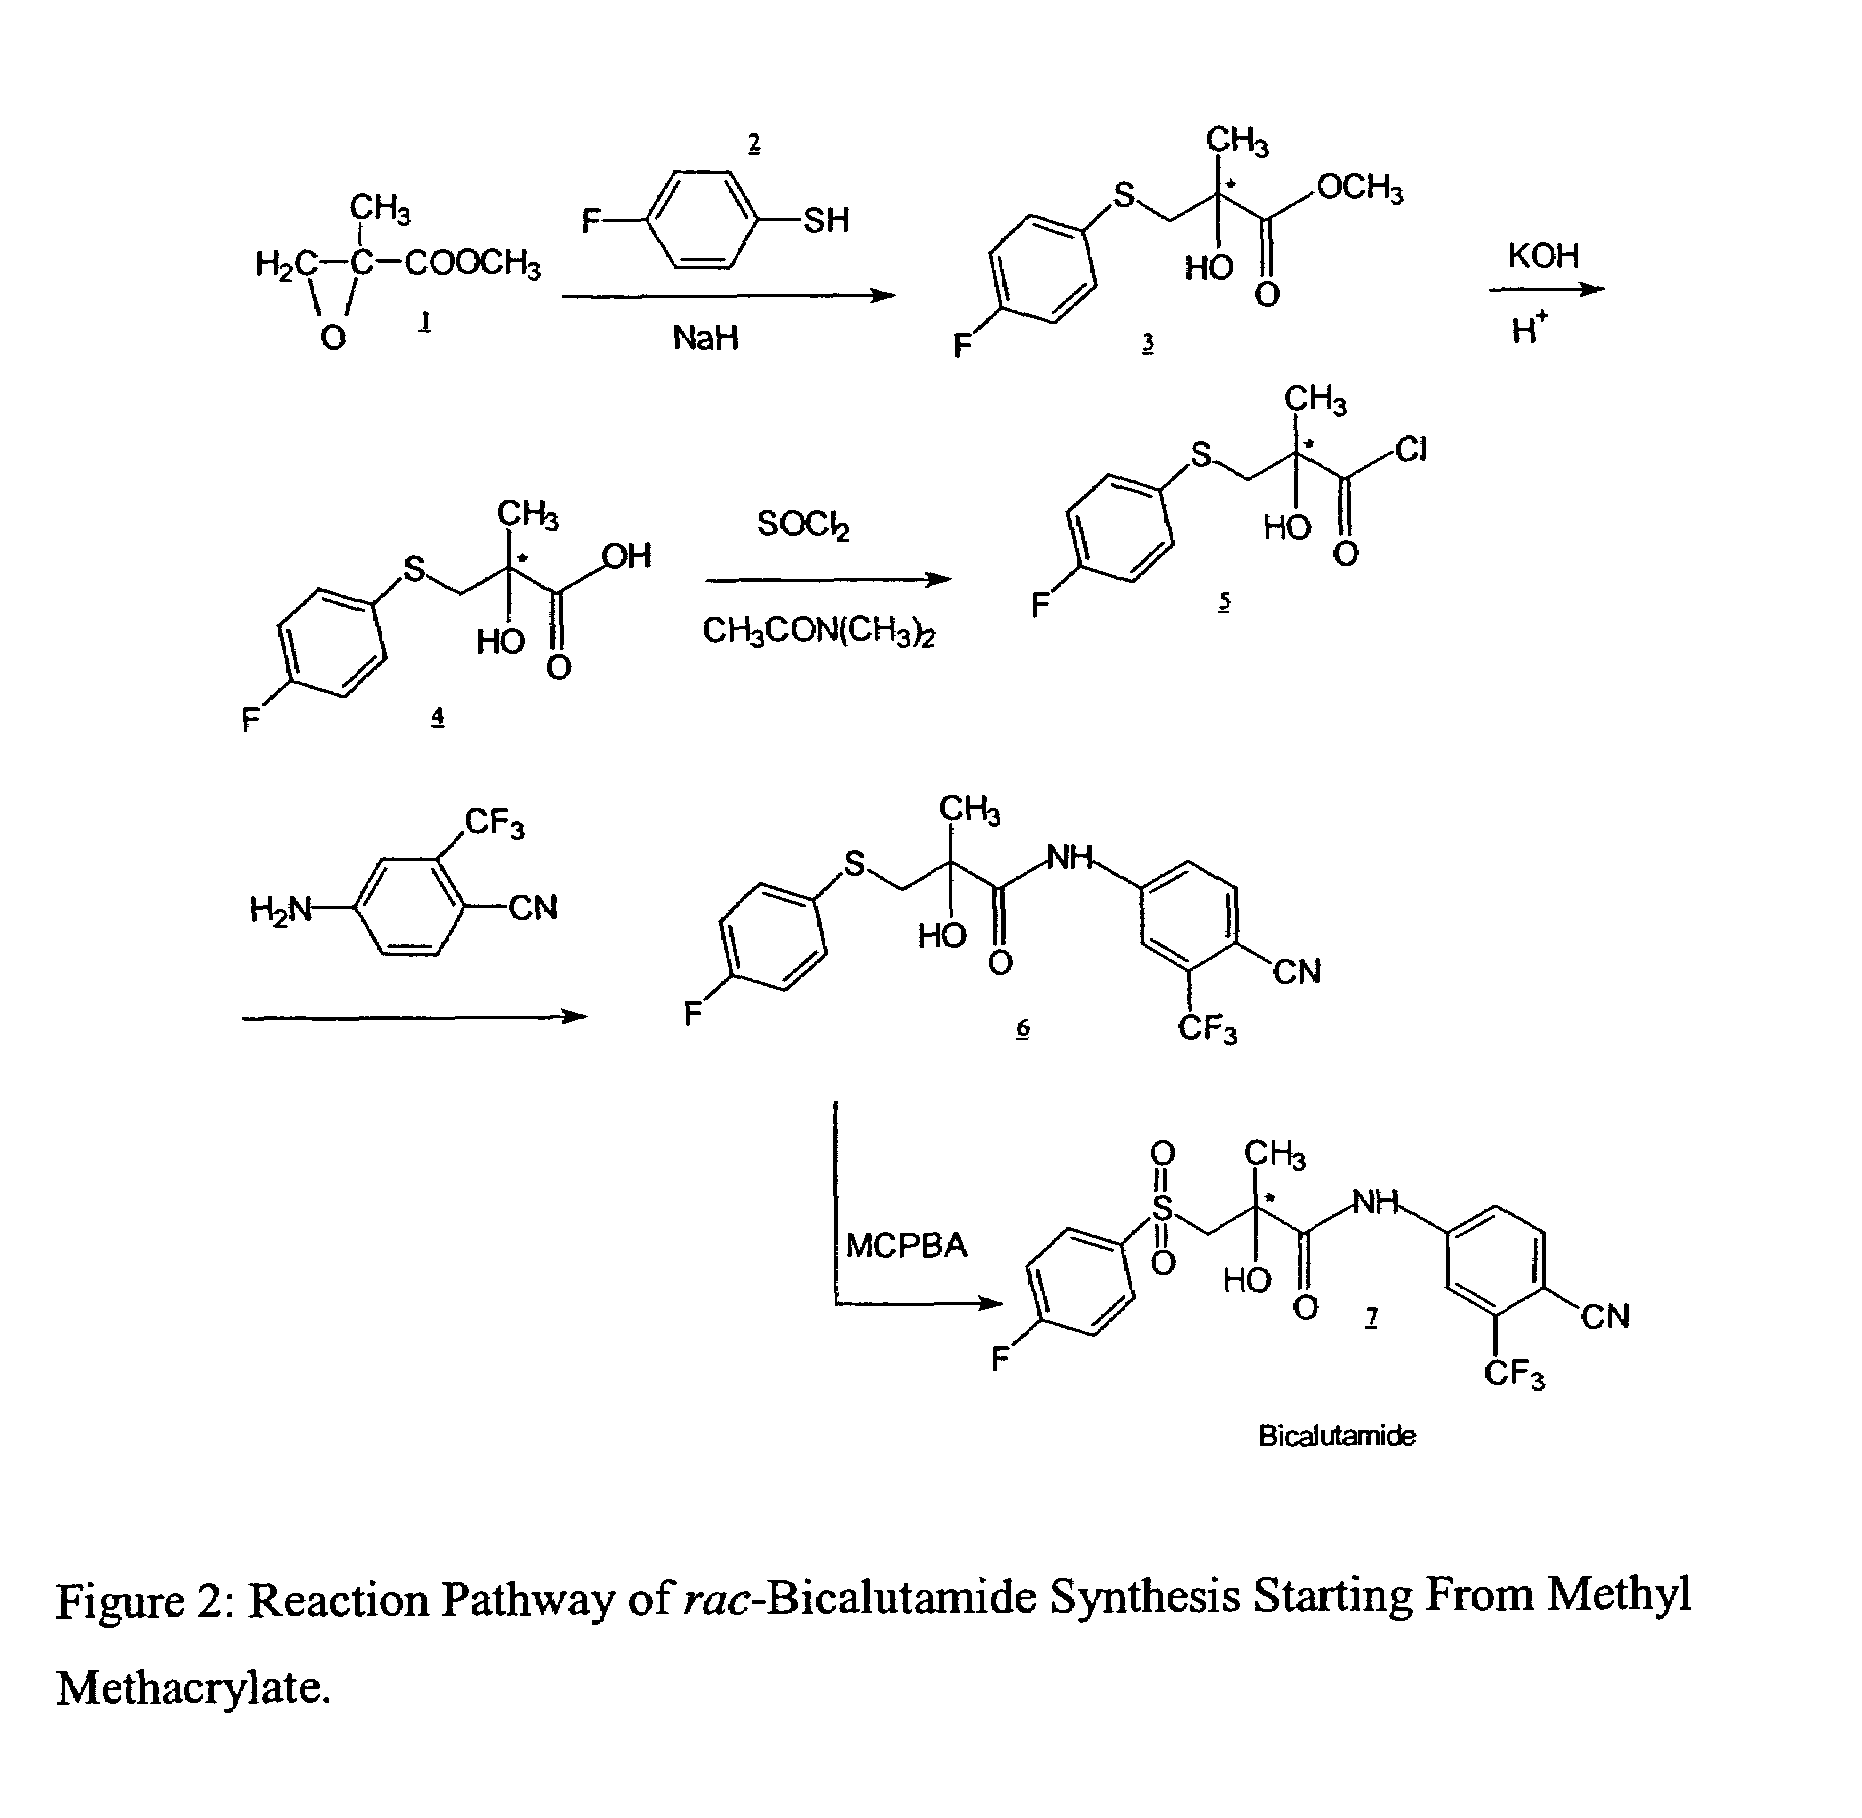 Process for preparing and isolating rac-bicalutamide and its intermediates